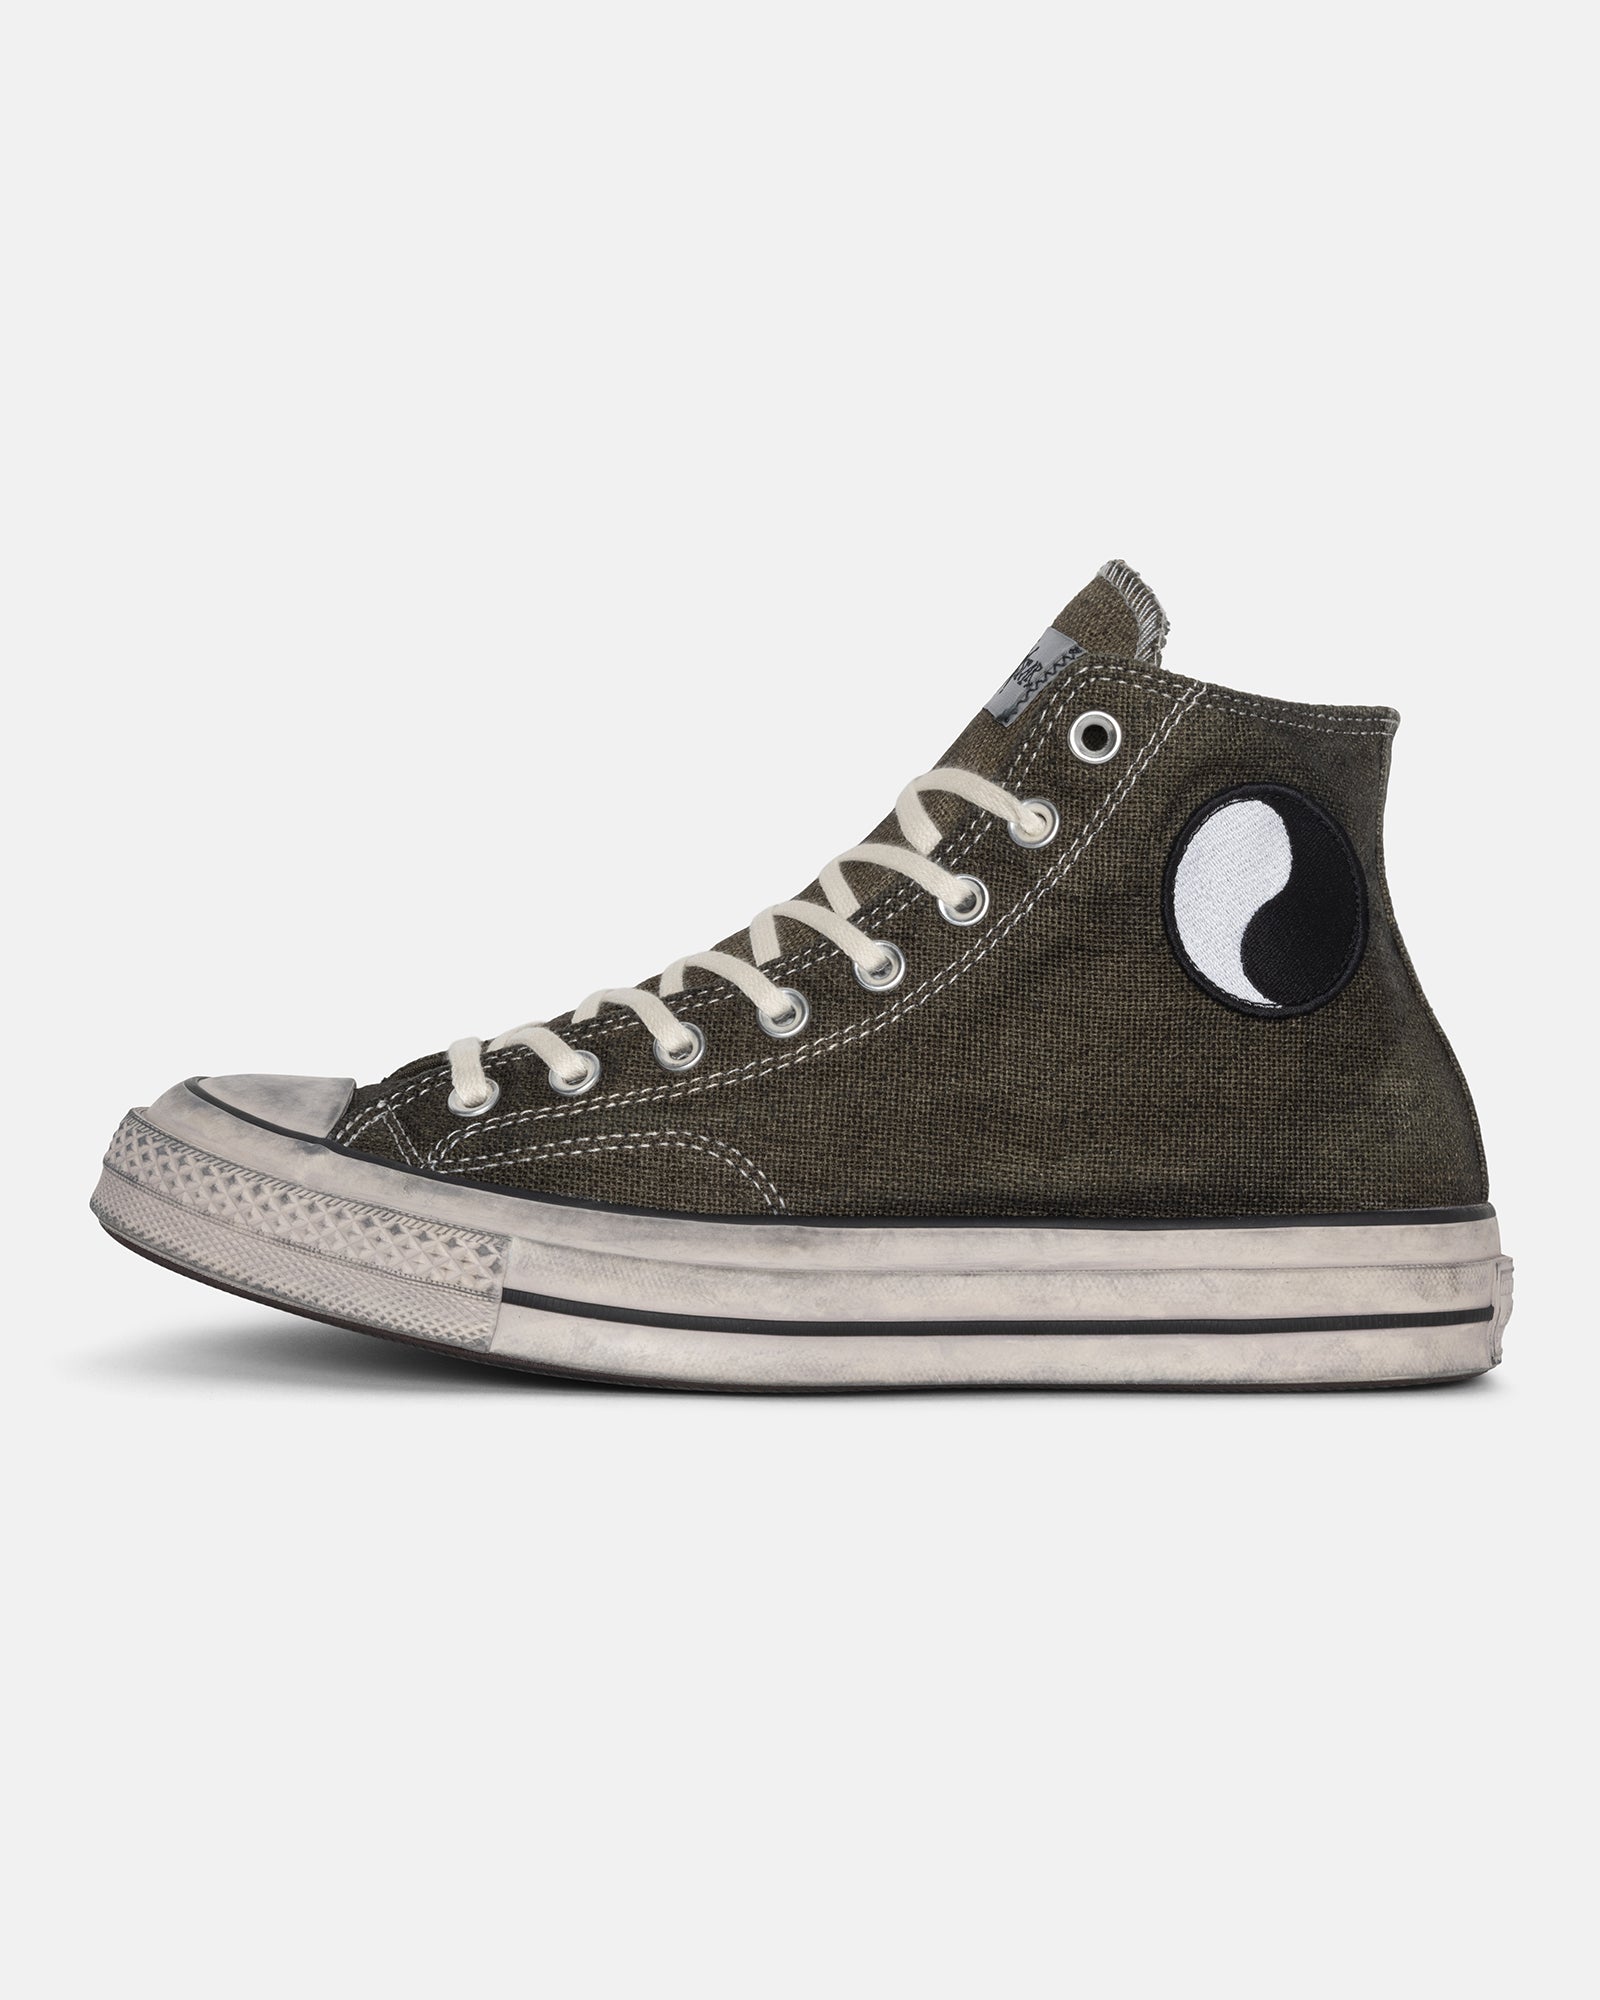 Our Legacy Work Shop & Stüssy Announce Converse Collection